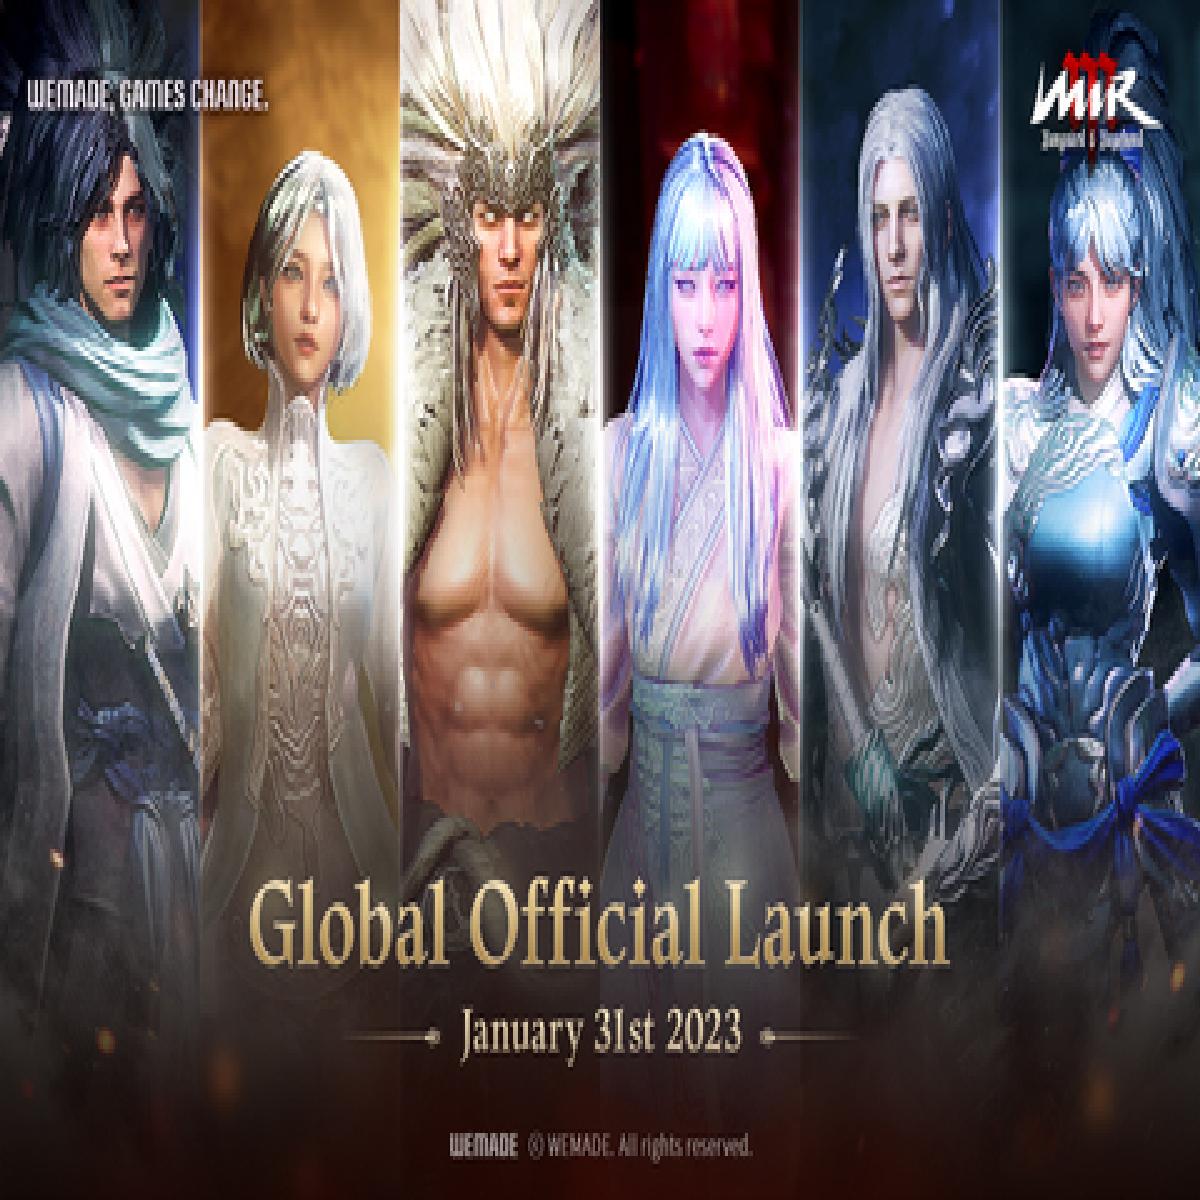 MIR M, MMORPG from Wemade, launching globally on January 31